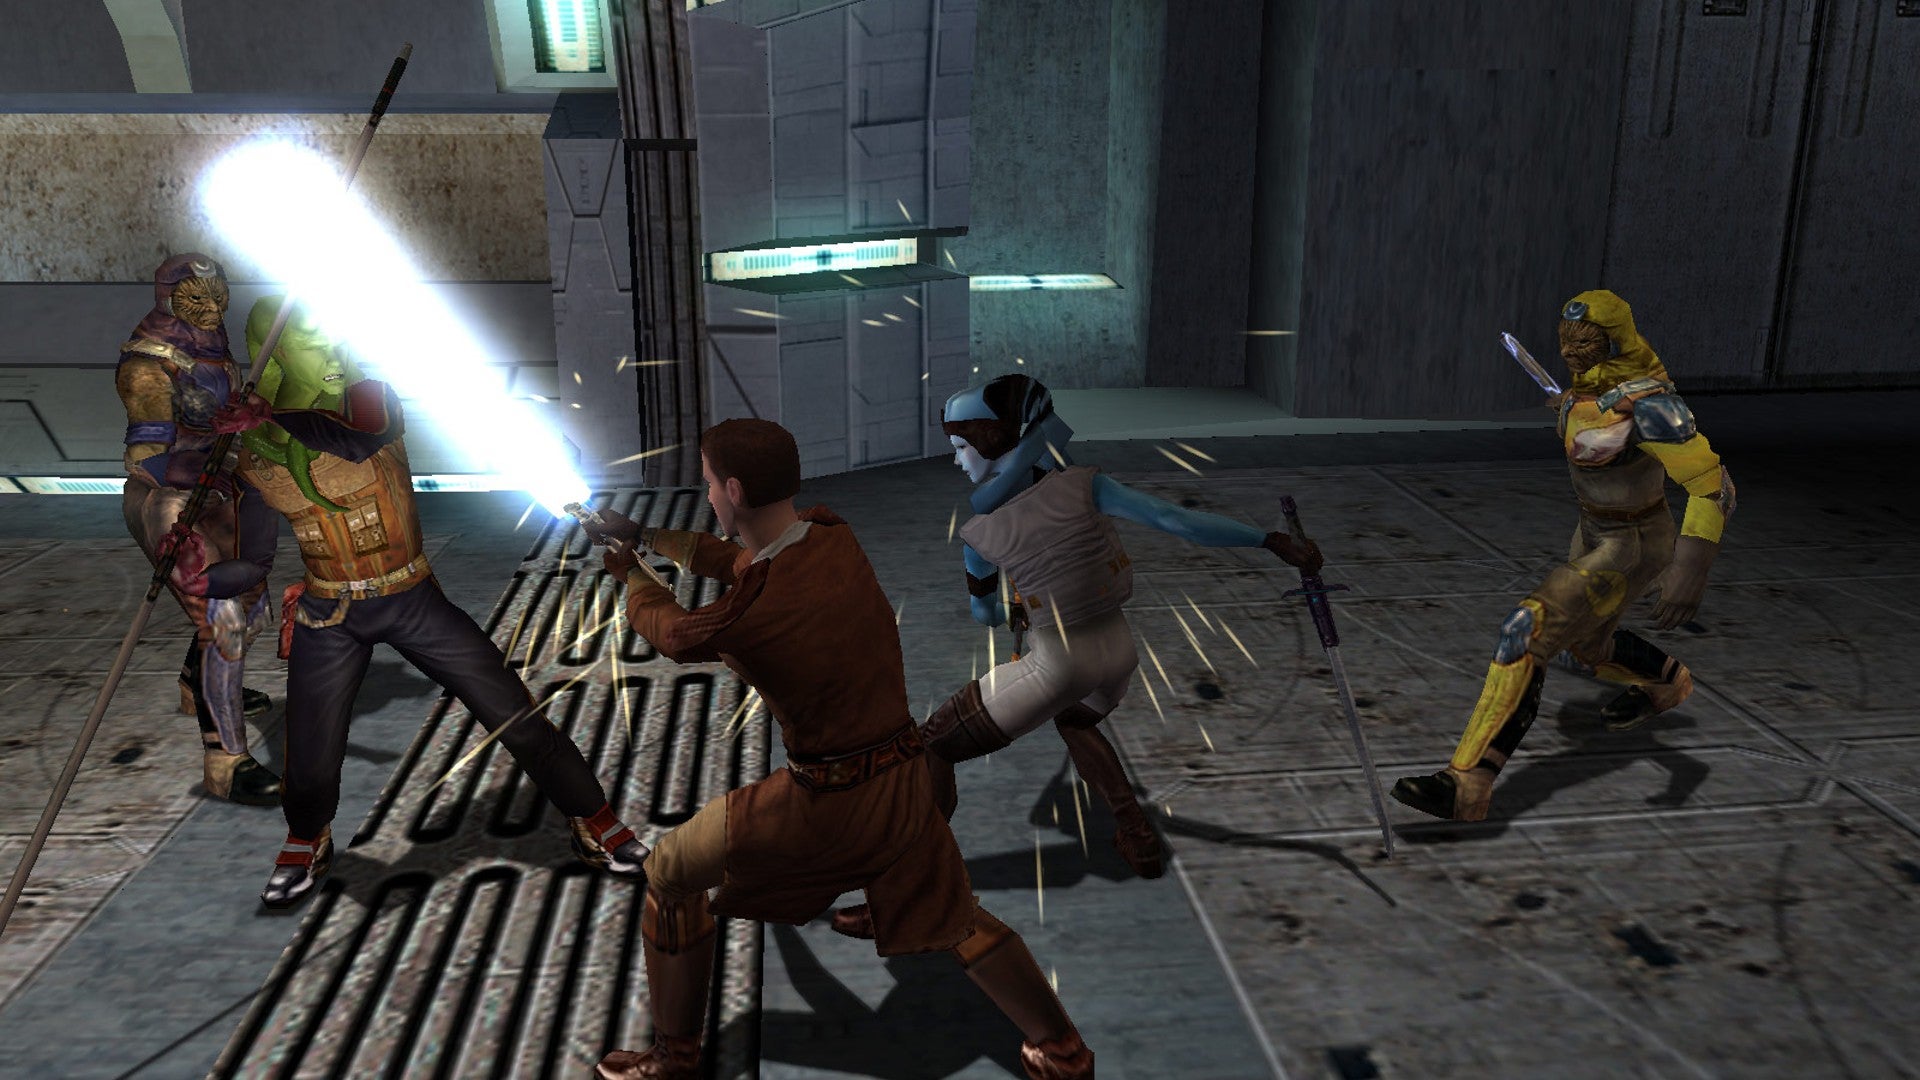 Star Wars Knights of the Old Republic showing five characters fighting. The human in the middle is swinging their lightsaber towards an alien's spear.